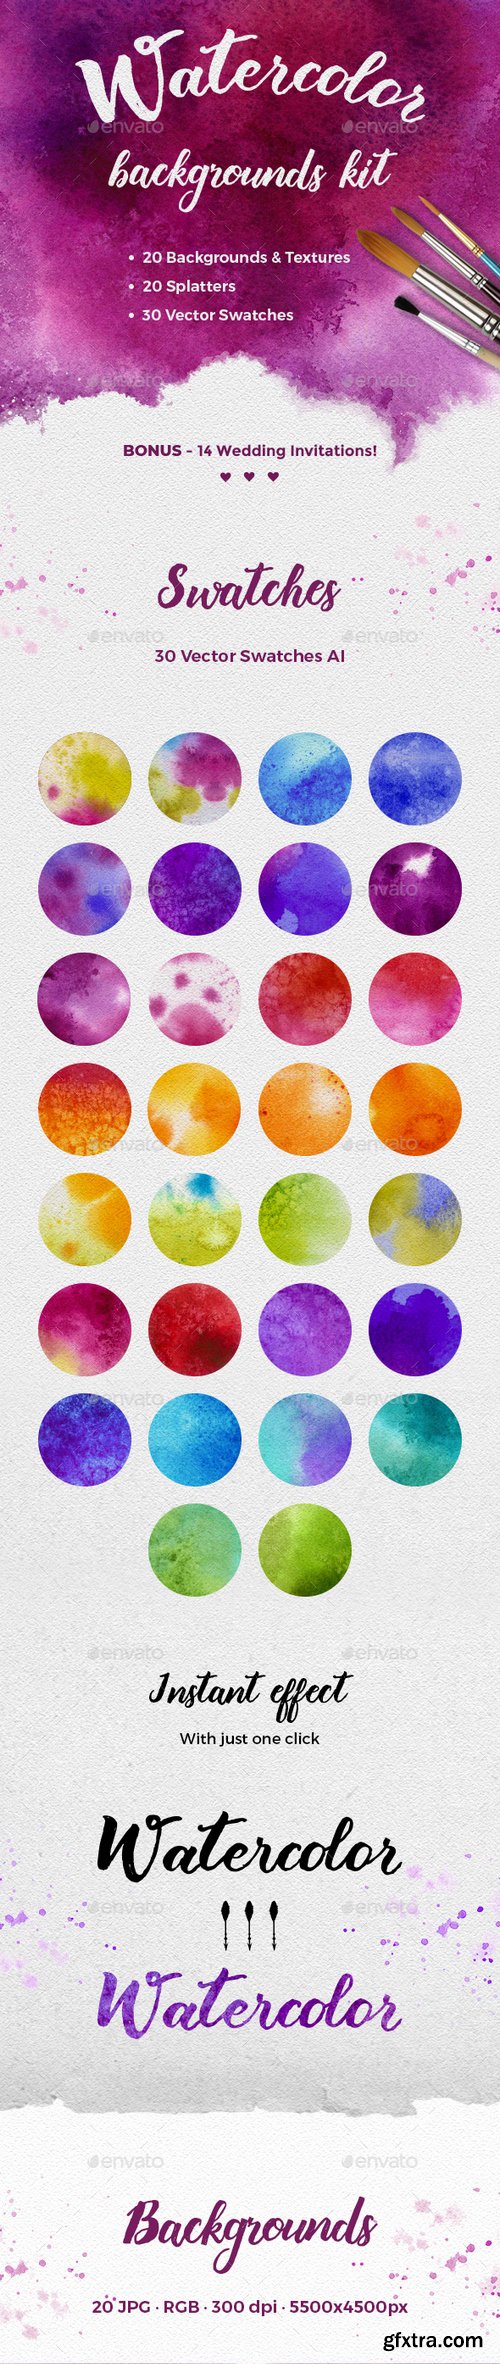 Graphicriver - Watercolor Backgrounds Kit 21774505